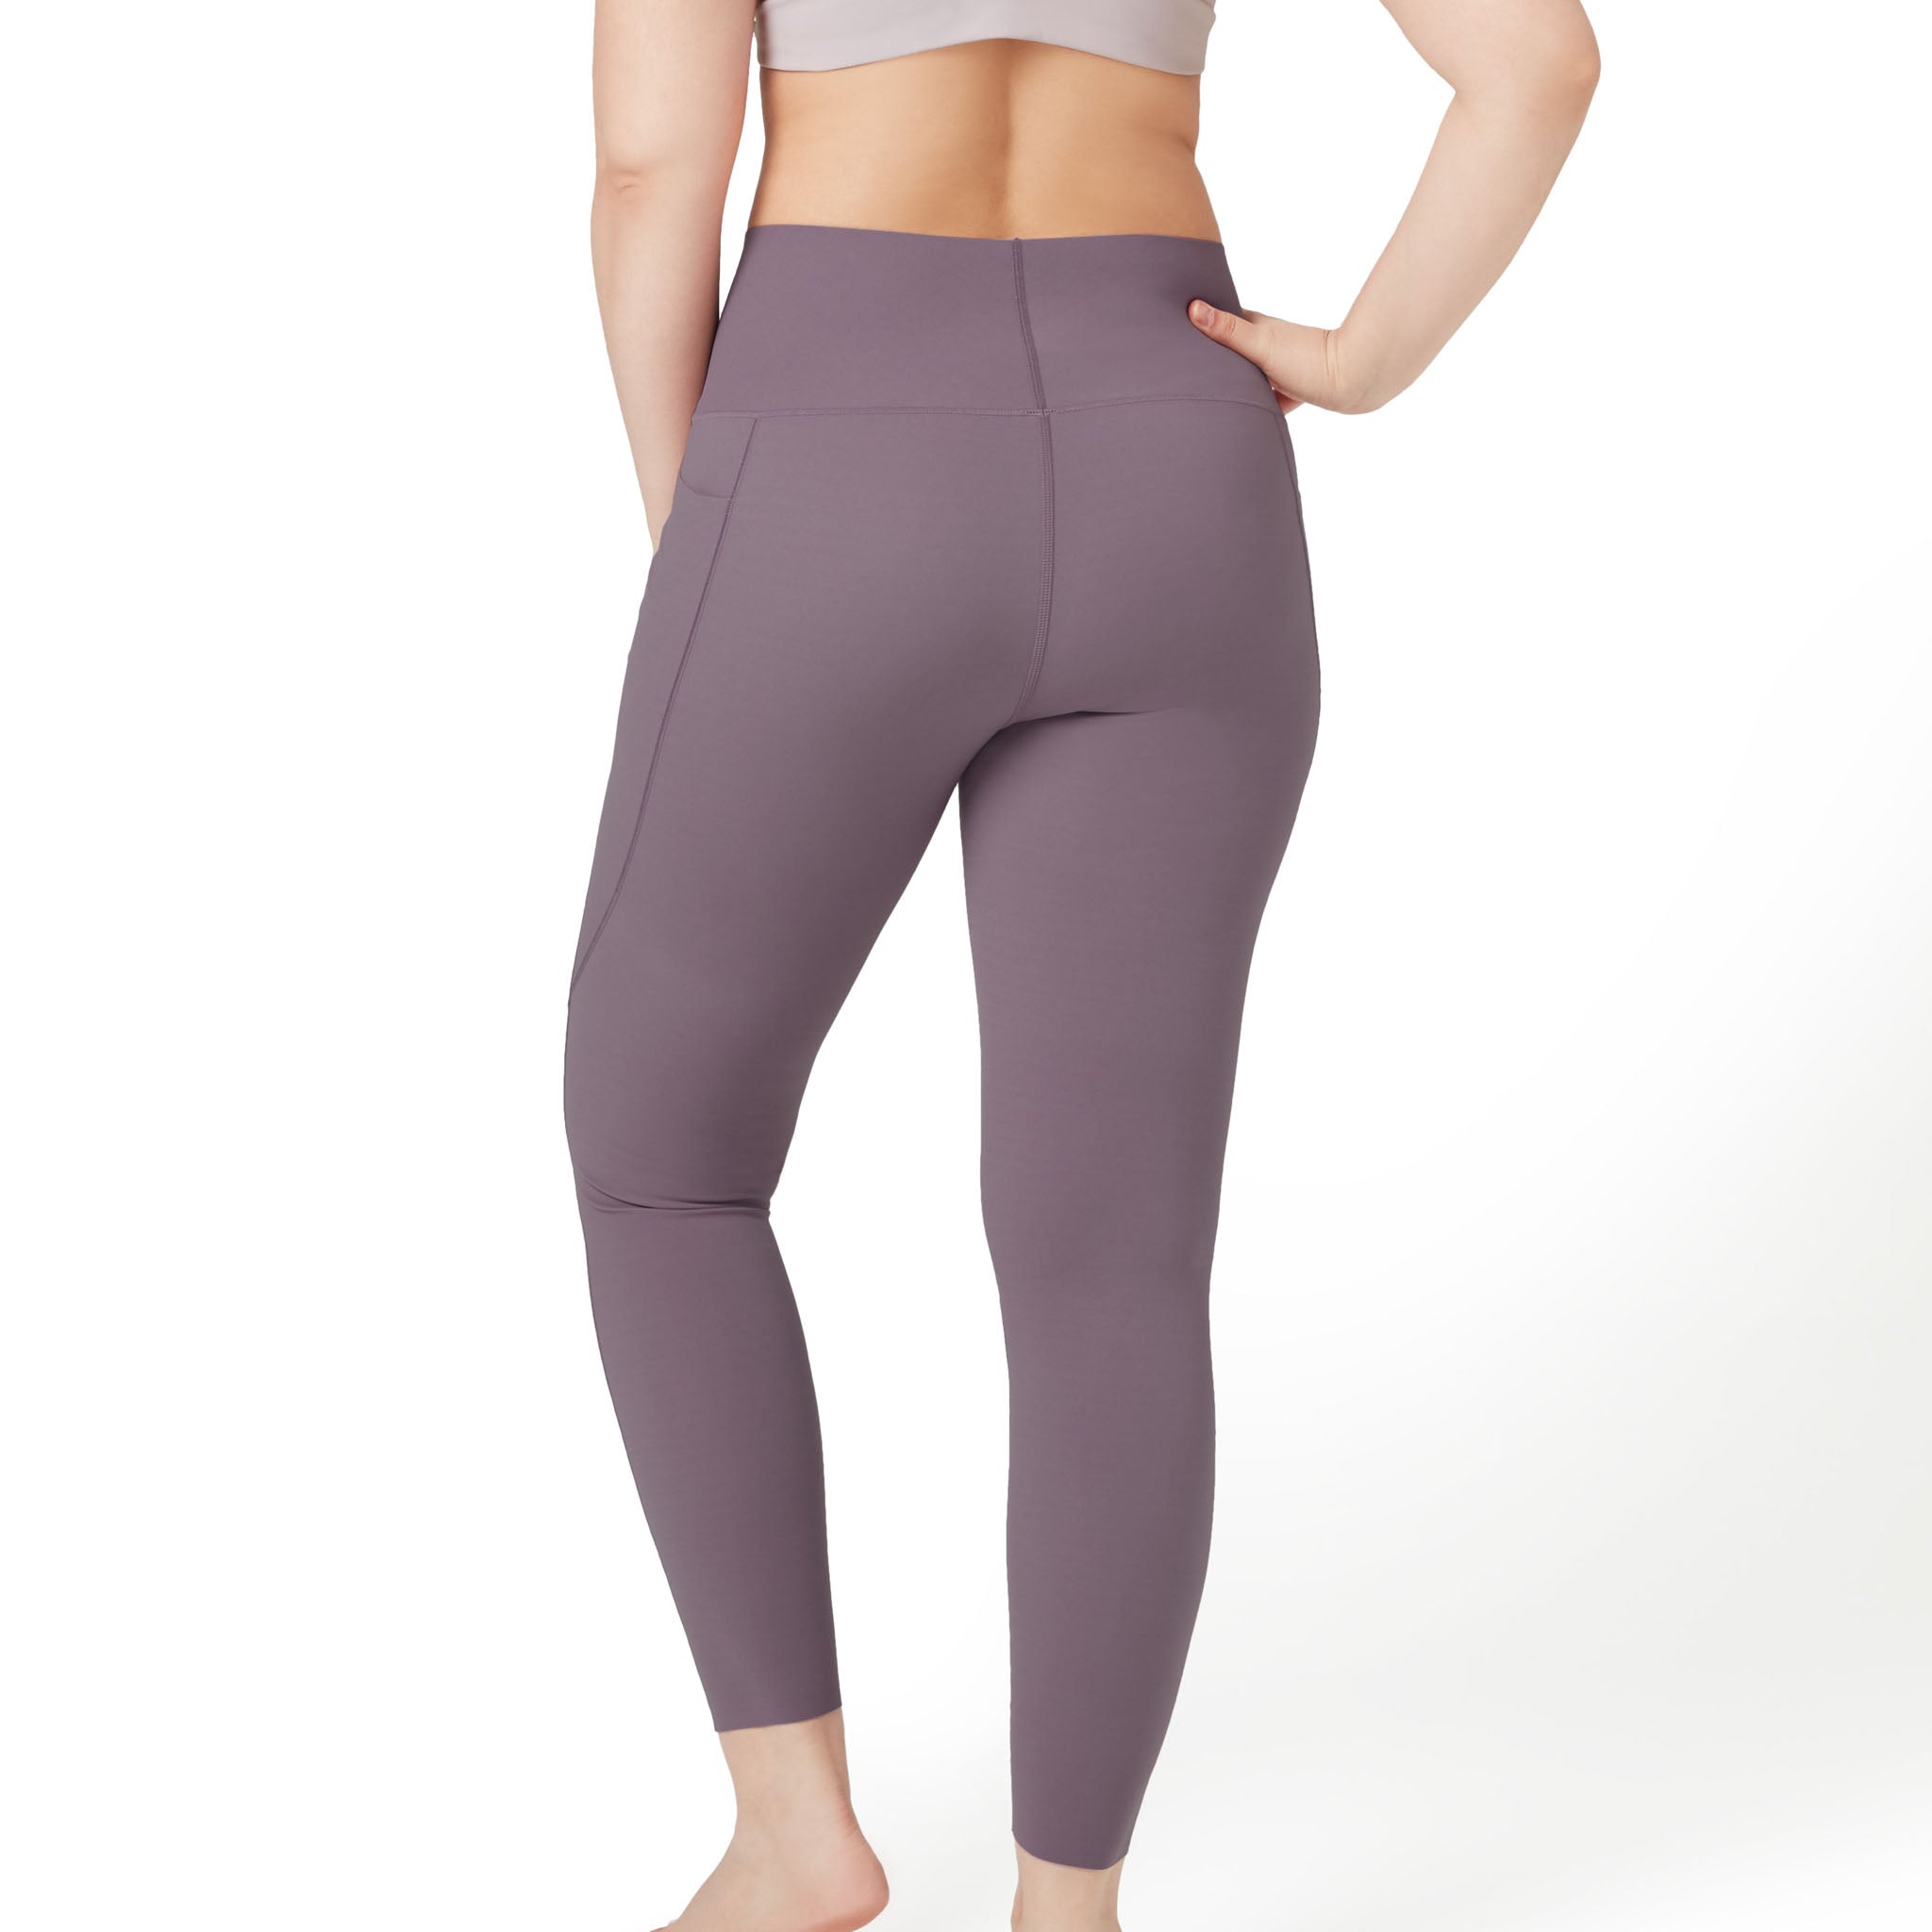 Floatley Carry-it High Waist Yoga Leggings with Pockets 26 Inseam